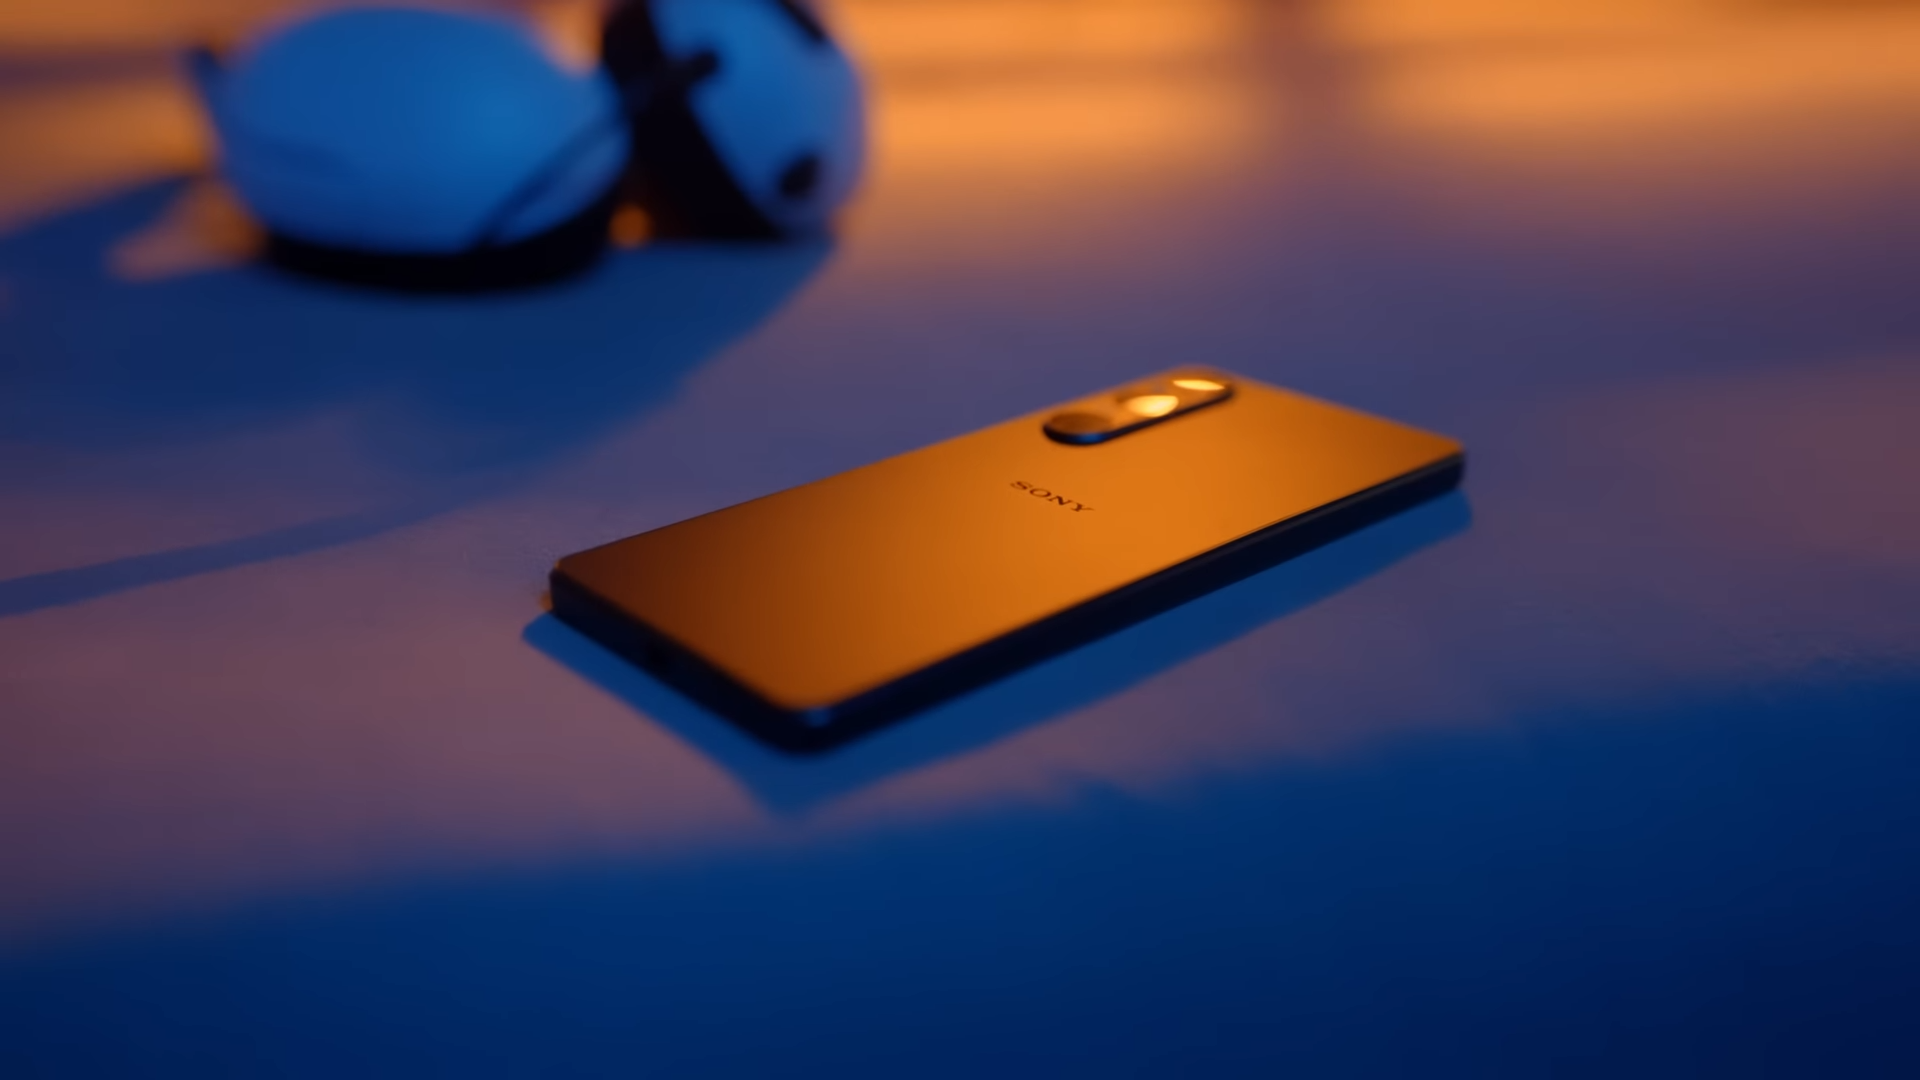 Sony Xperia 1 V laying on the table with orange and blue lights shining on it